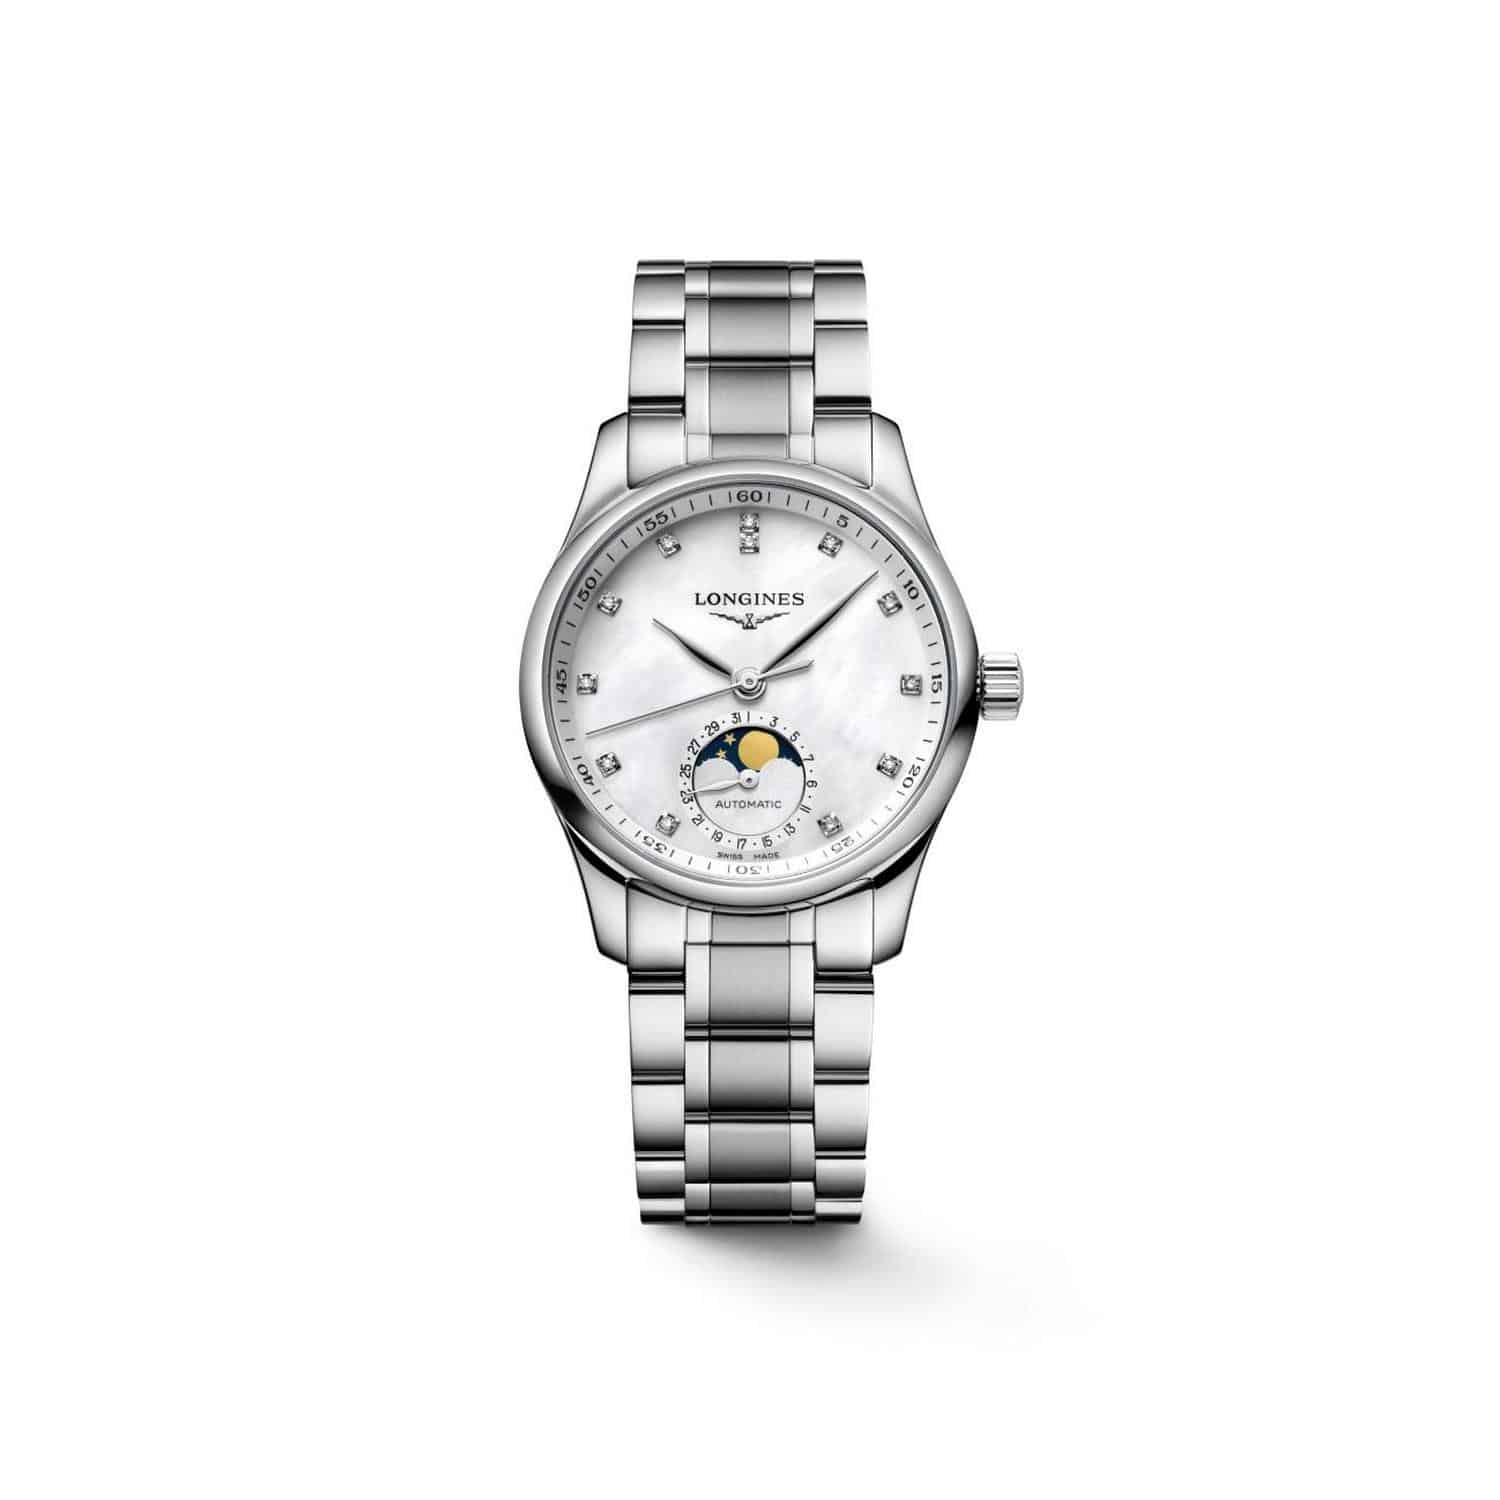 LONGINES THE LONGINES MASTER COLLECTION MOONPHASE 34MM - L24094876